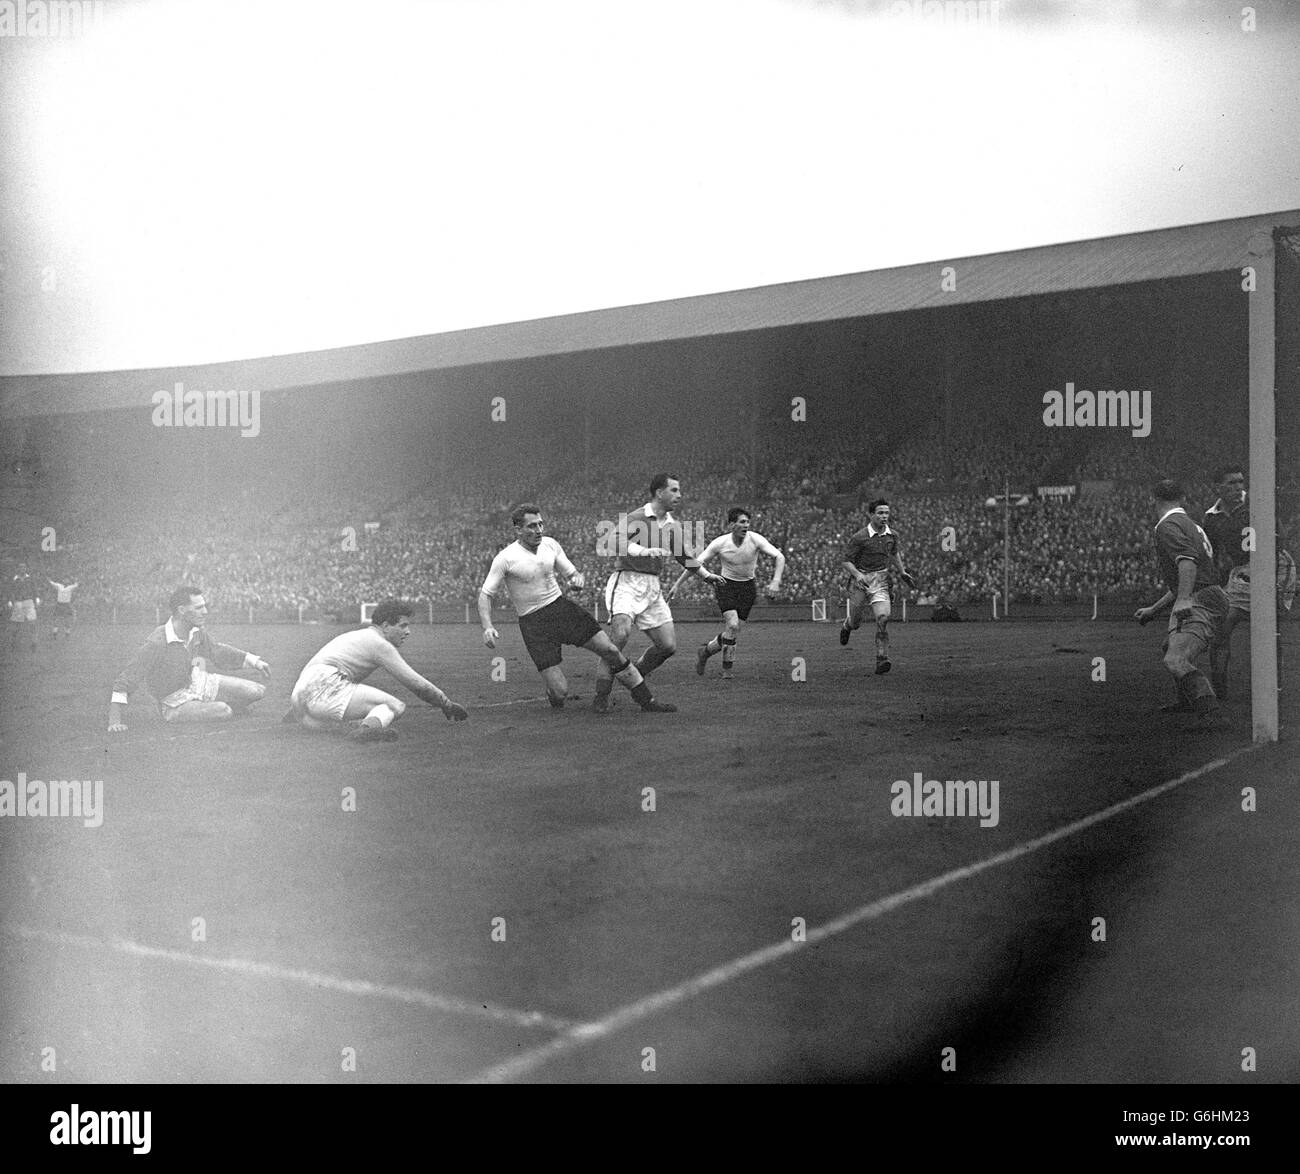 Chelsea's Roy Bentley (3rd from left) scores the third goal for his hat-trick to give England victory in the British Championships international match against Wales at Wembley Stadium, London. (From l-r) Ray Daniel, Wales and Sunderland centre-half, John King, Wales and Swansea goalkeeper, Roy Bentley, England inside right, Roy Paul, Wales and Manchester City right half, Len Shakleton, England and Sunderland inside left, and Derek Tapscott, Wales and Arsenal outside right. On the goal line are Welsh backs Alf Sherwood (Cardiff) and Stuart Williams (West Bromwich Albion). Stock Photo